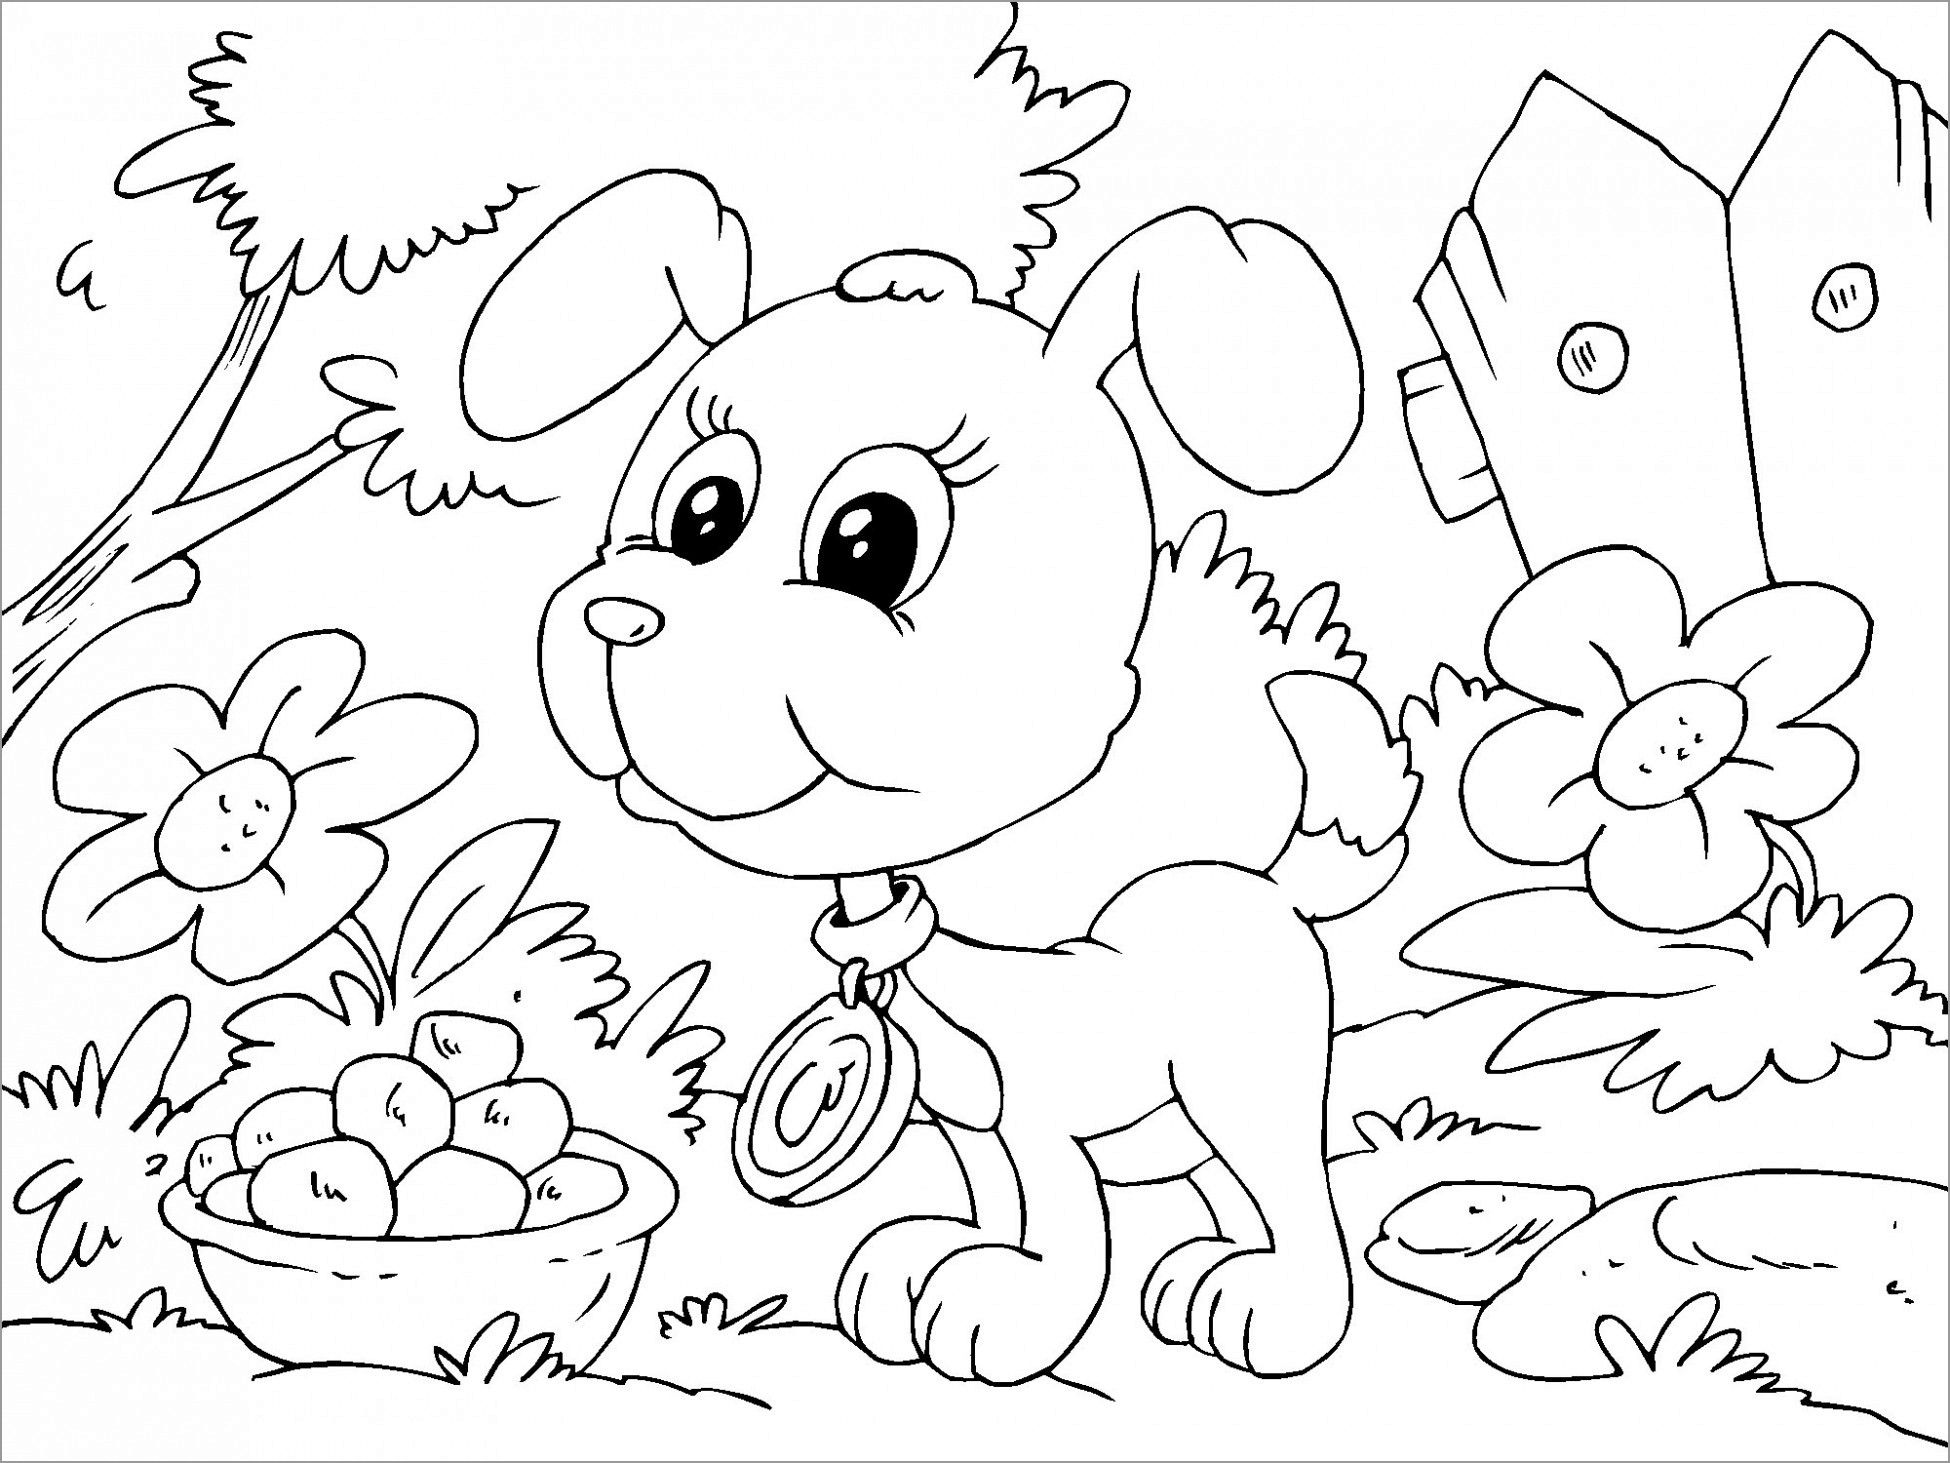 Puppy Coloring Pages for Adult